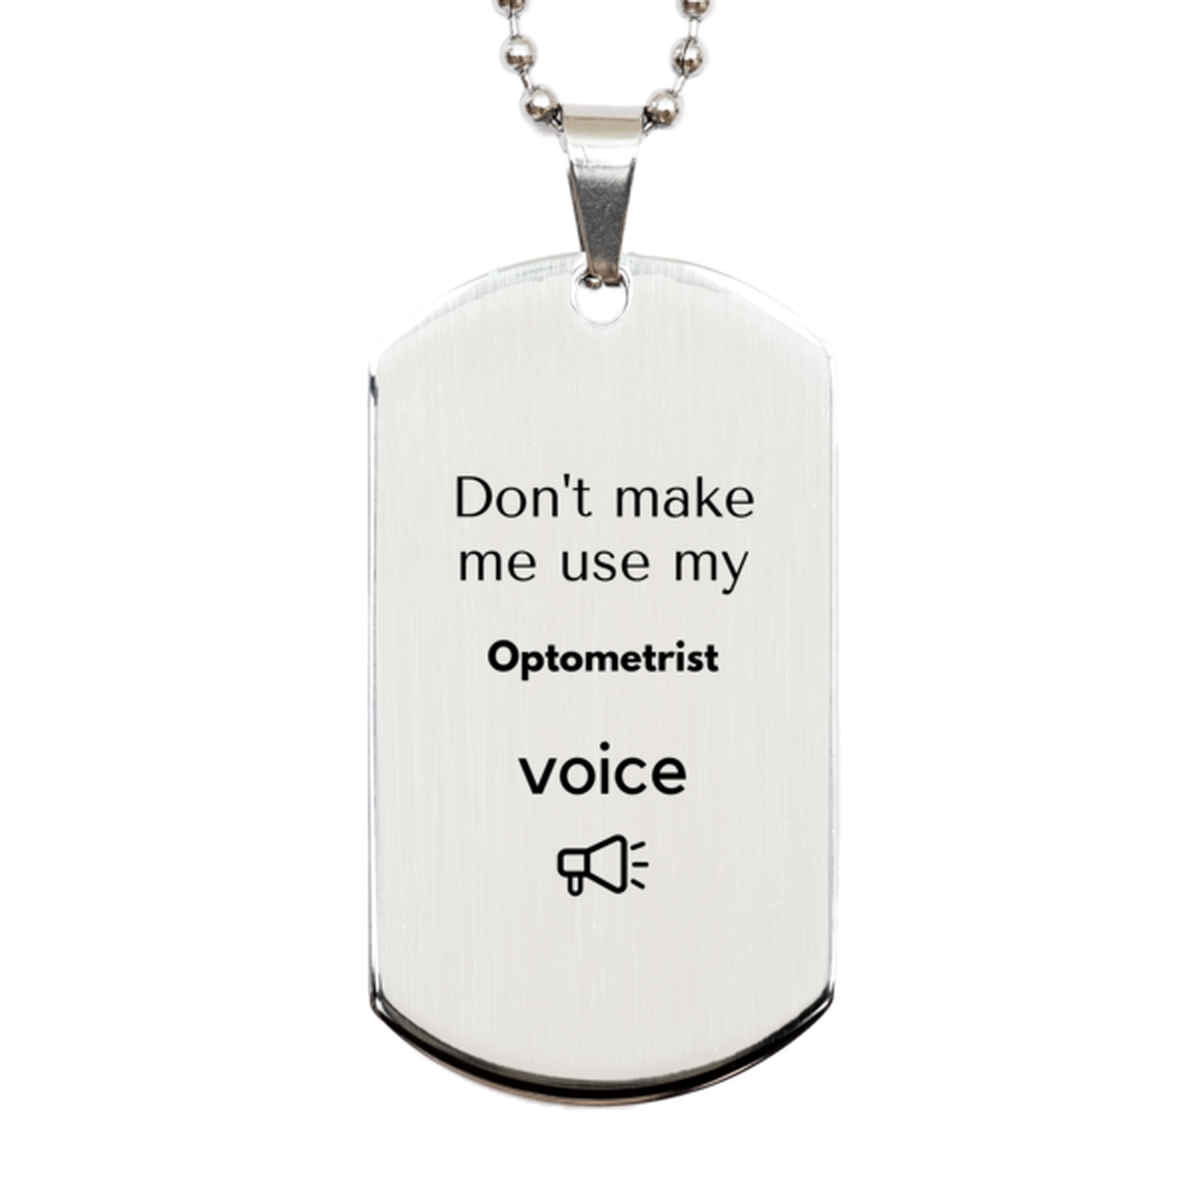 Don't make me use my Optometrist voice, Sarcasm Optometrist Gifts, Christmas Optometrist Silver Dog Tag Birthday Unique Gifts For Optometrist Coworkers, Men, Women, Colleague, Friends